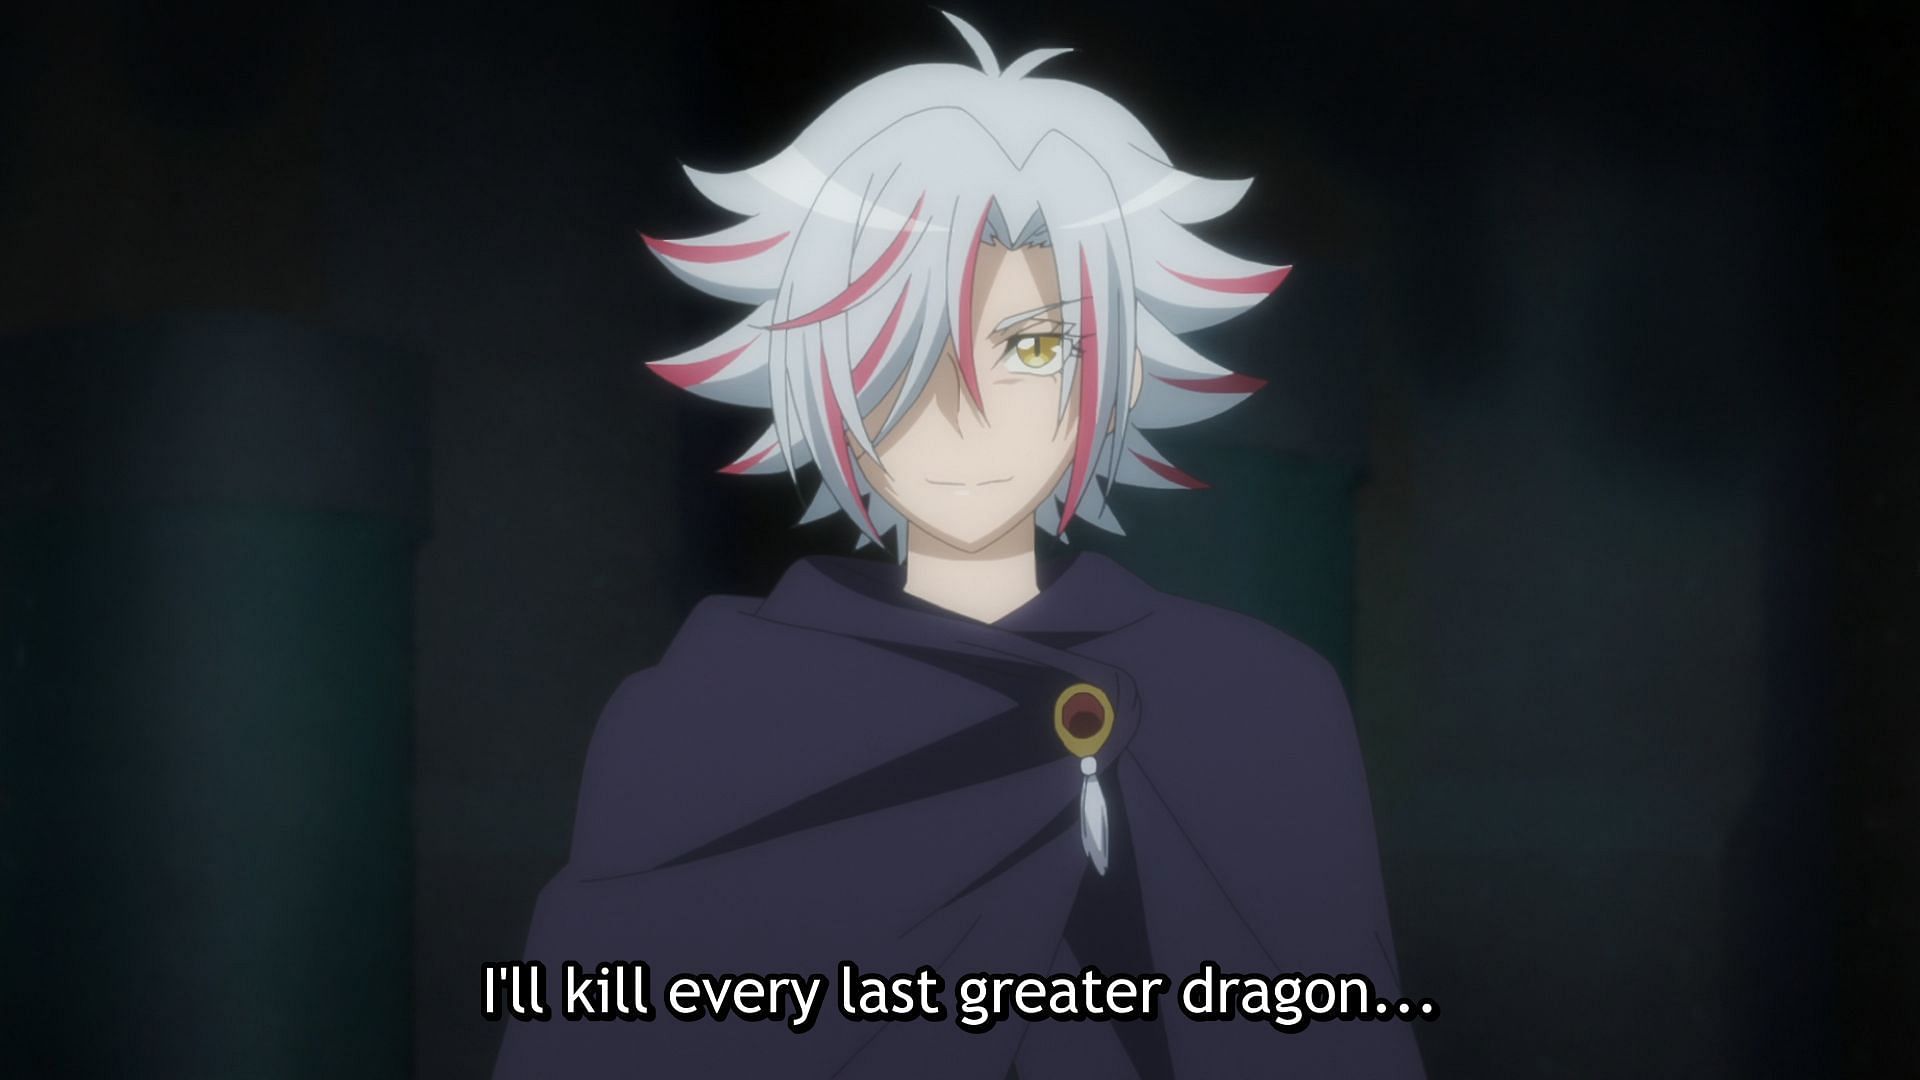 Sofia vows to defeat the greater dragons (Image via J.C.Staff)